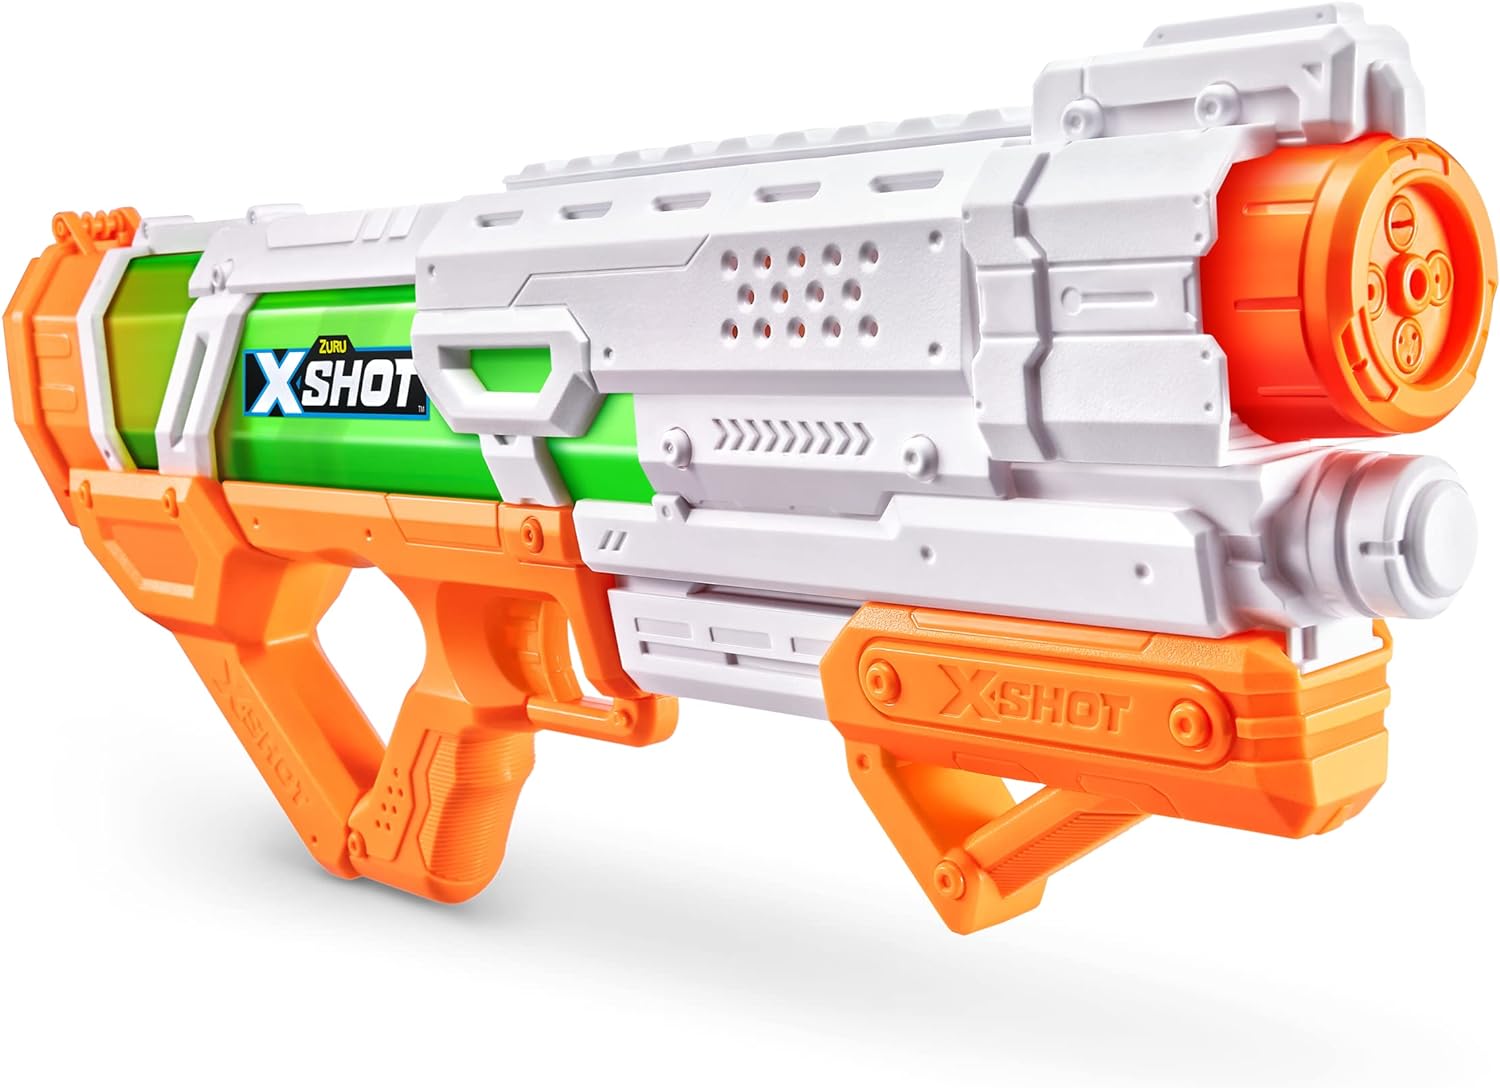 X-Shot Fast-Fill Epic Water Blaster by ZURU, Watergun for Summer, XShot Water Toys, Squirt Gun Soaker (Fills with Water in just 1 Second!) Big Water Toy for Children, Boys, Teen, Men (Large)